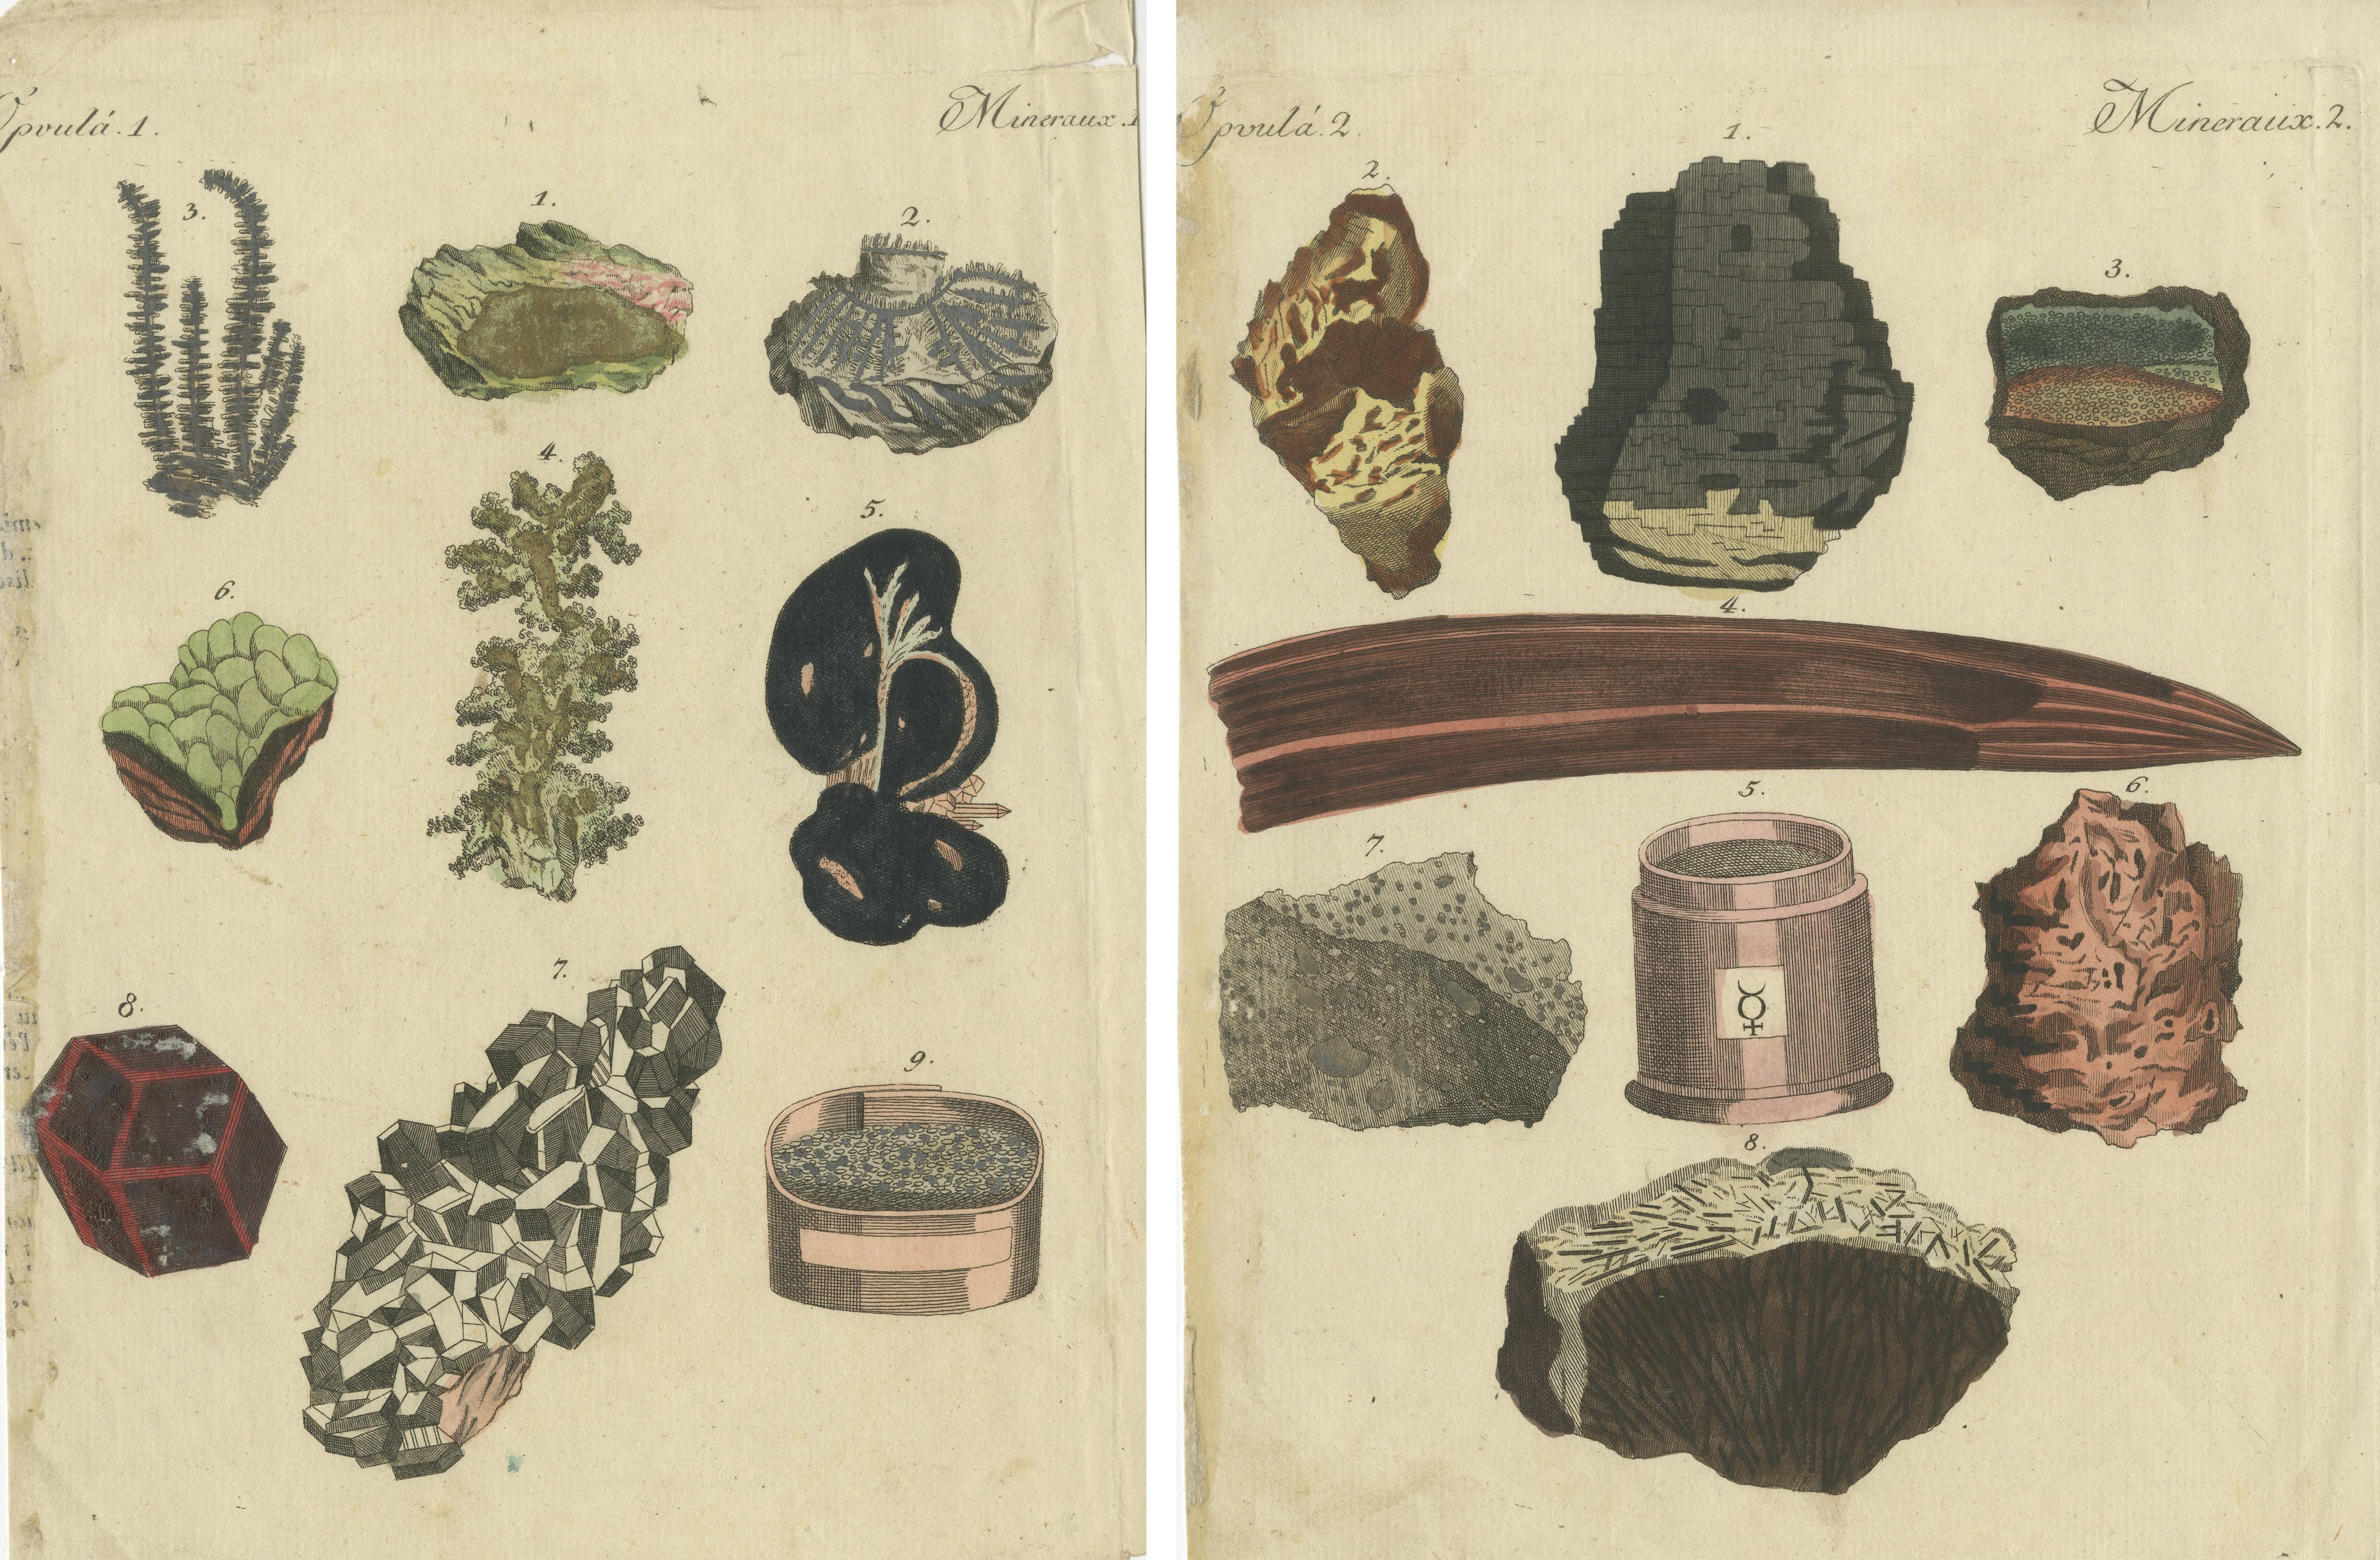 Set of two original antique prints of various minerals. The first plate shows gold 1, silver 2,3, copper dendrite 4, blue copper 5, malachite copper 6, garnet tin 7, tin crystal 8, and tin sand 9. The second plate shows lead 1, iron 2,3,4, mercury